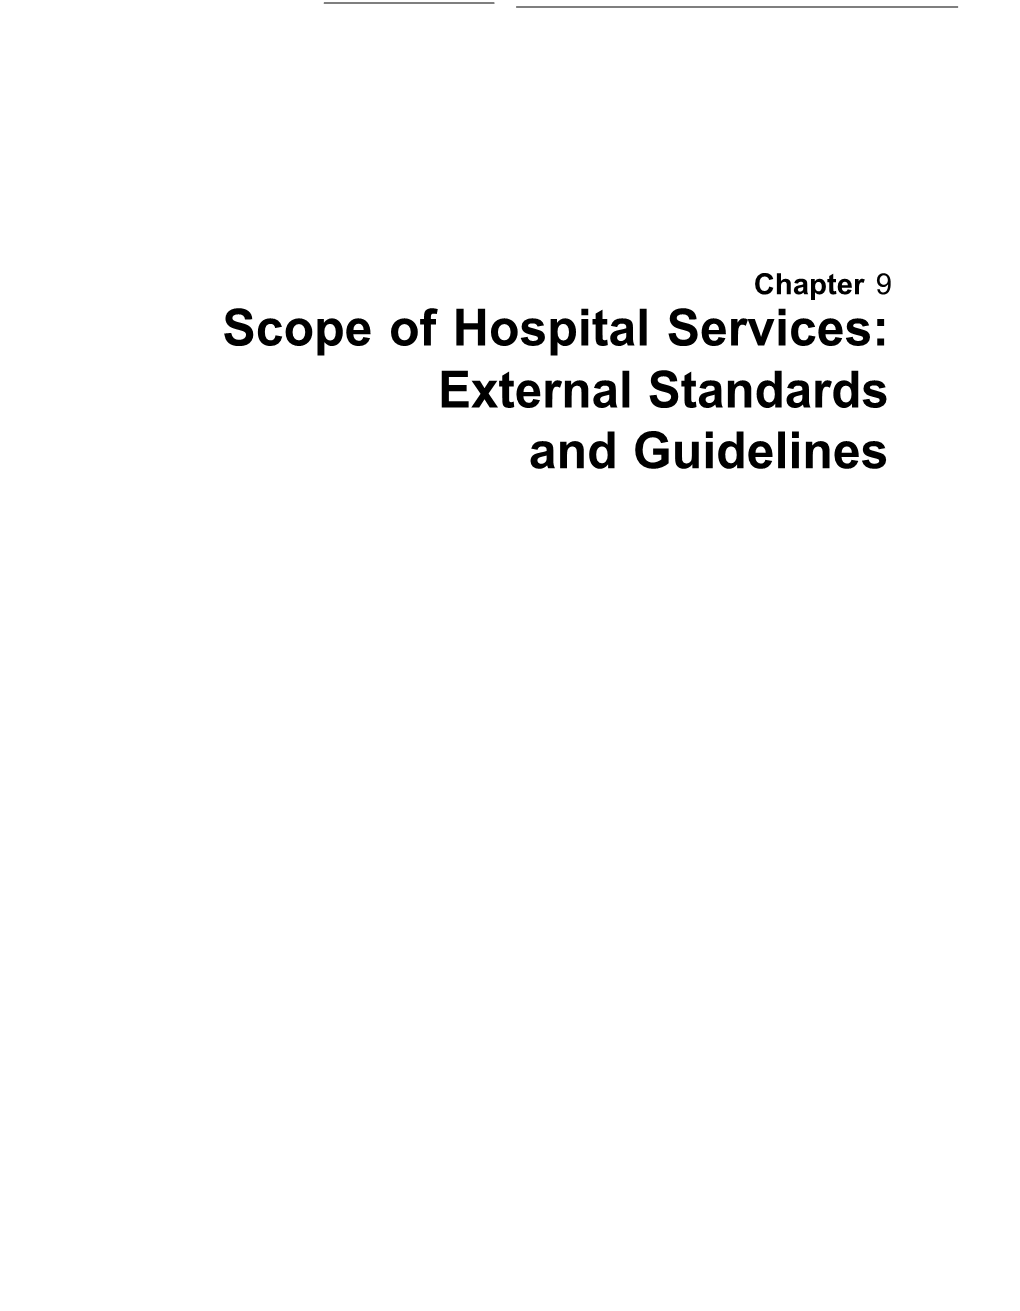 Scope of Hospital Services: External Standards and Guidelines CONTENTS